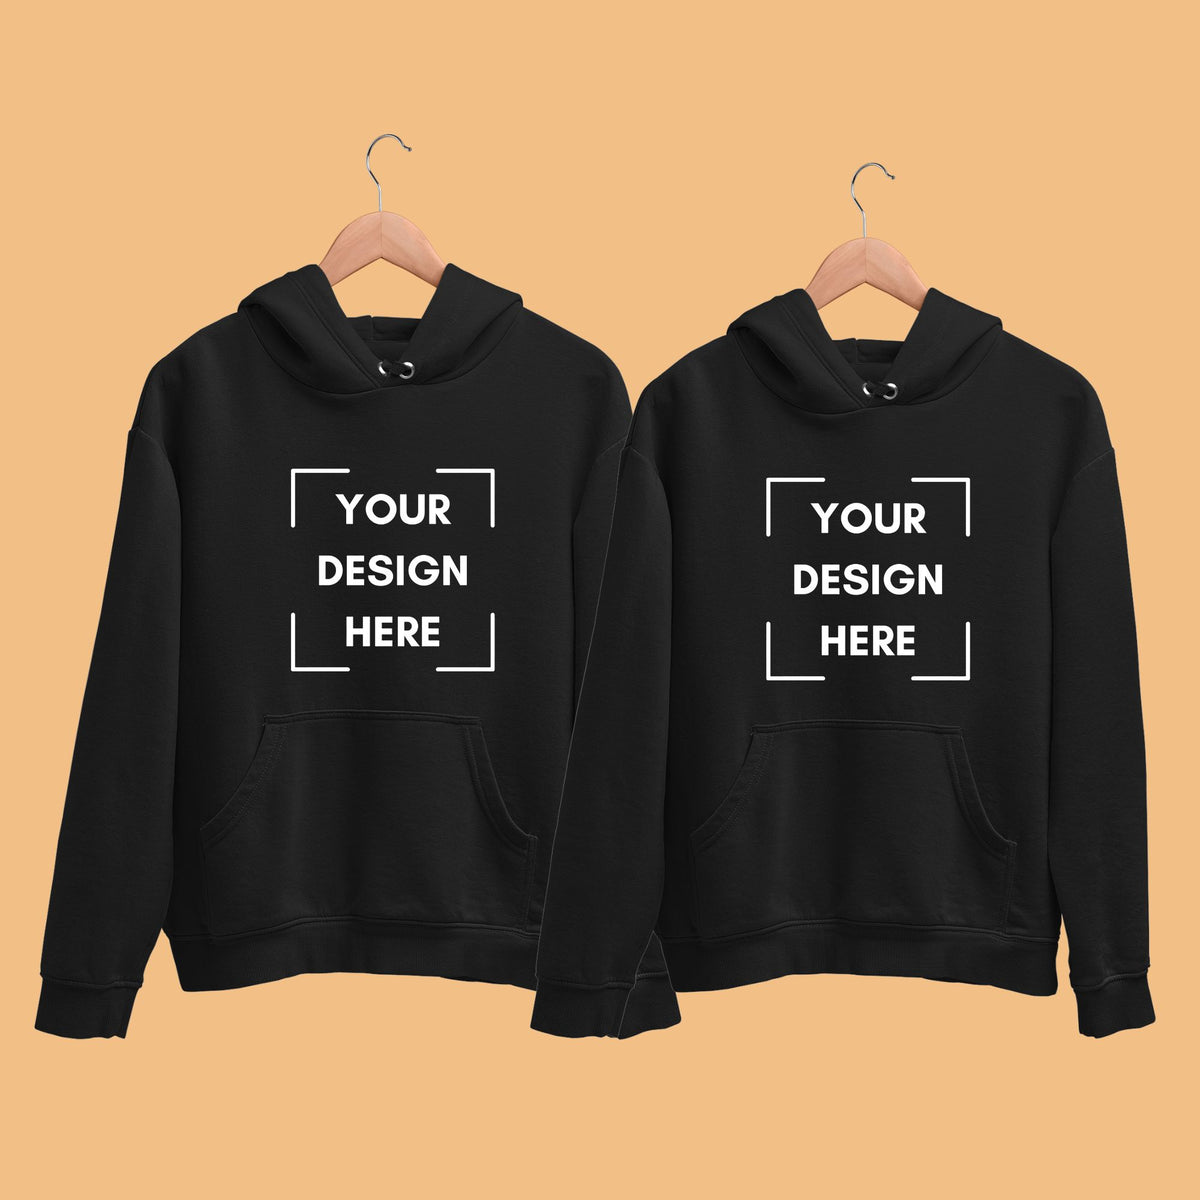  personalise-with-your-design-custom-made-black-couple-hoodie-gogirgit.com